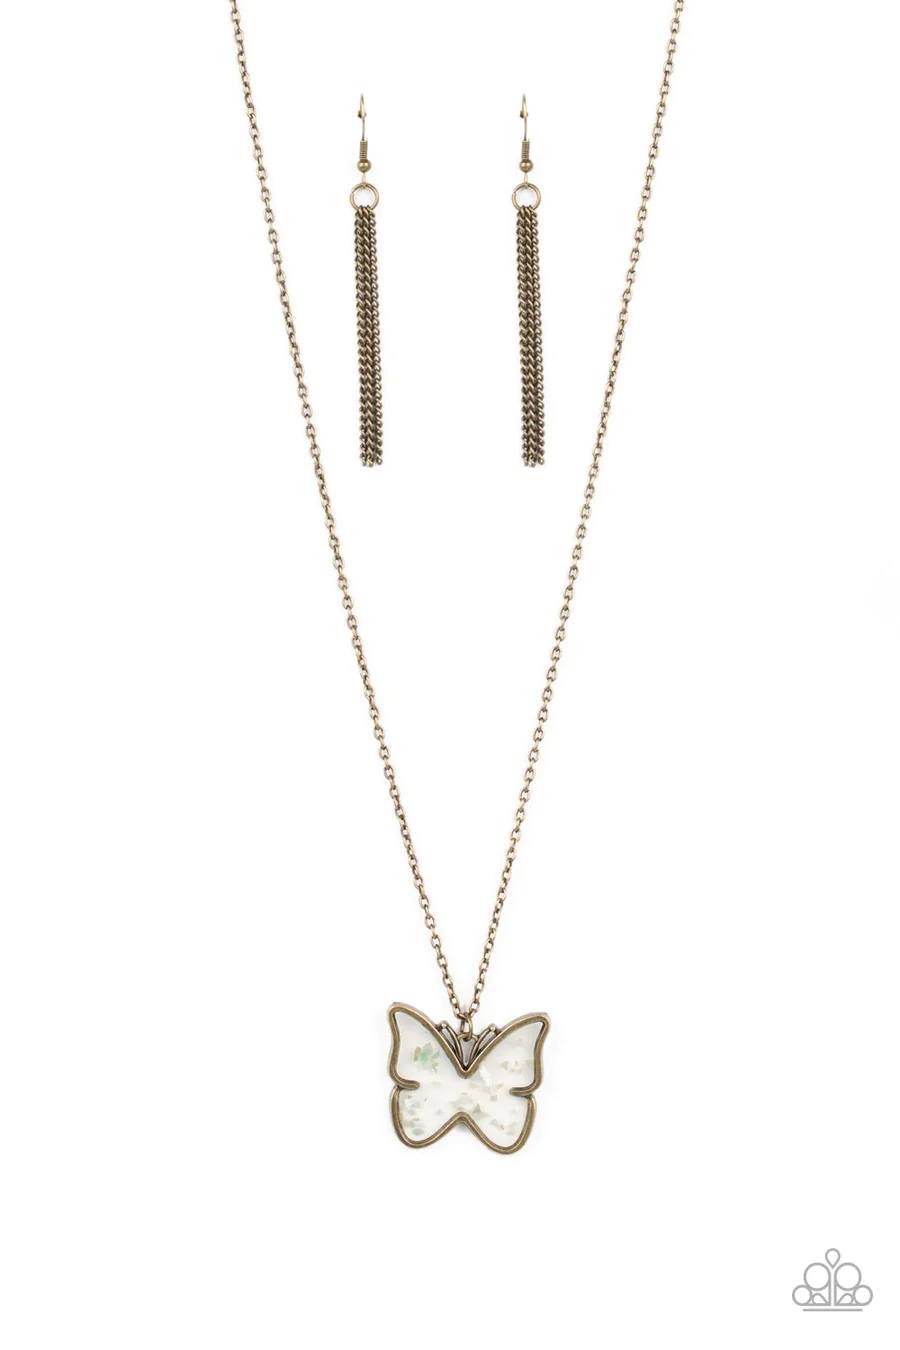 Gives Me Butterflies - Brass Clear Acrylic Butterfly White Flecks Short Necklace